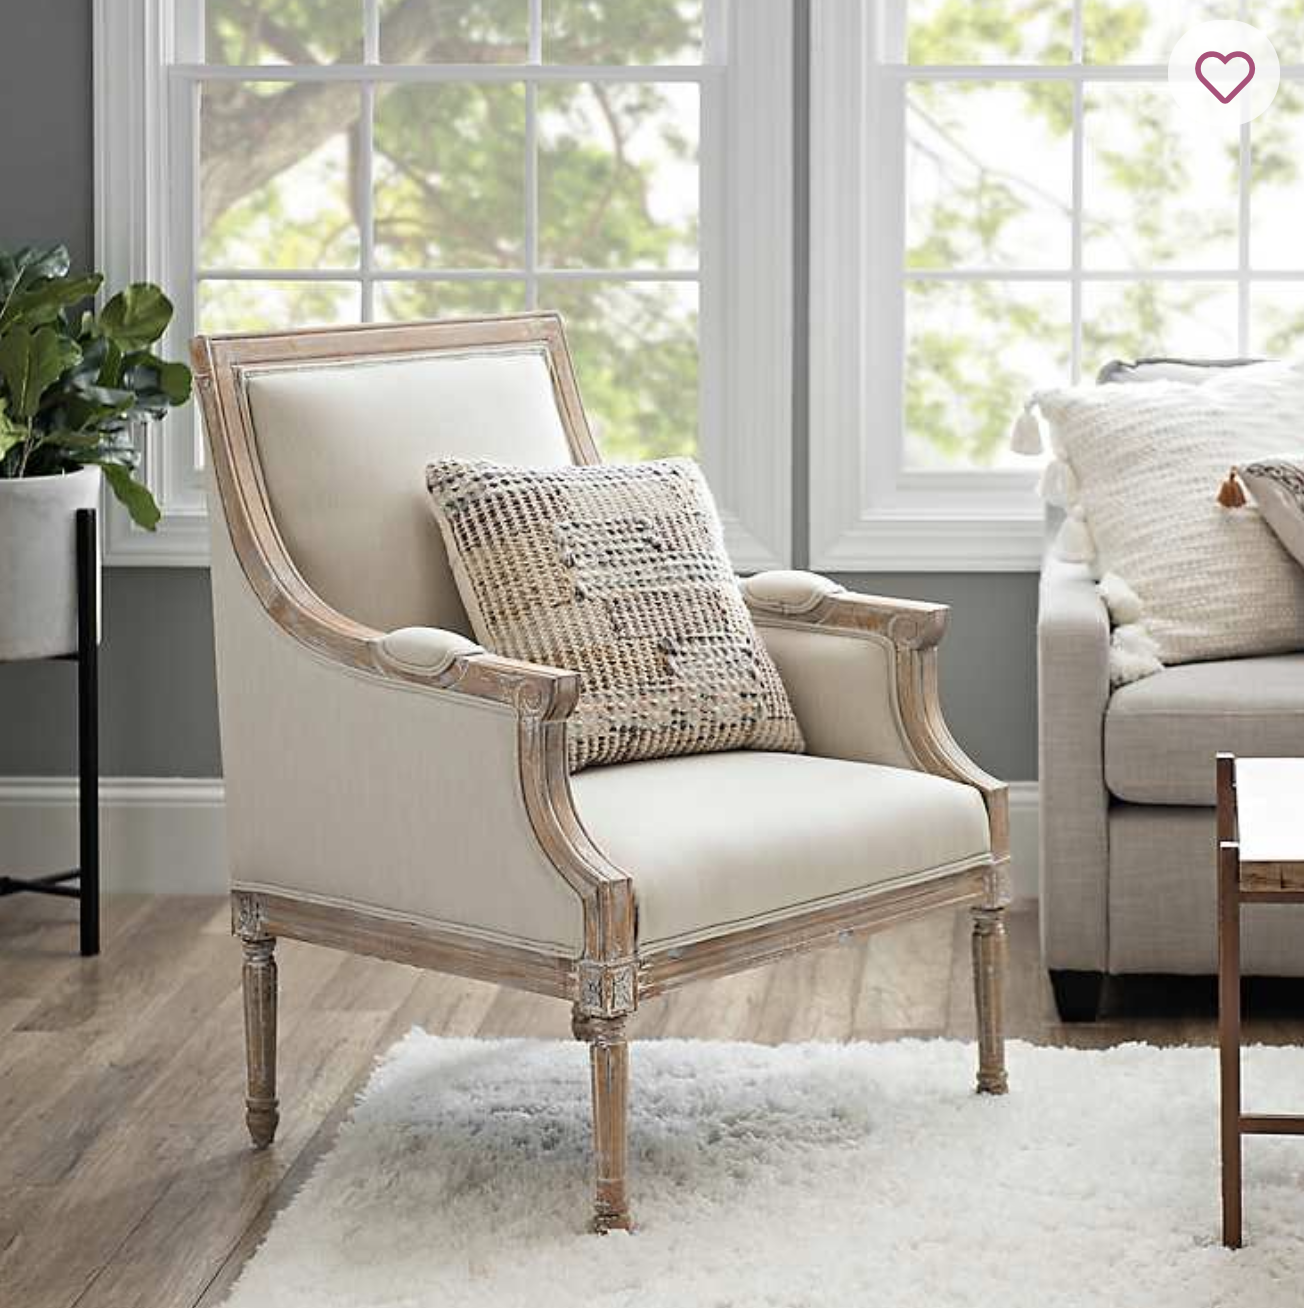 Accent-chair. +110 Unique Living Room Furniture Pieces That Amaze Everyone